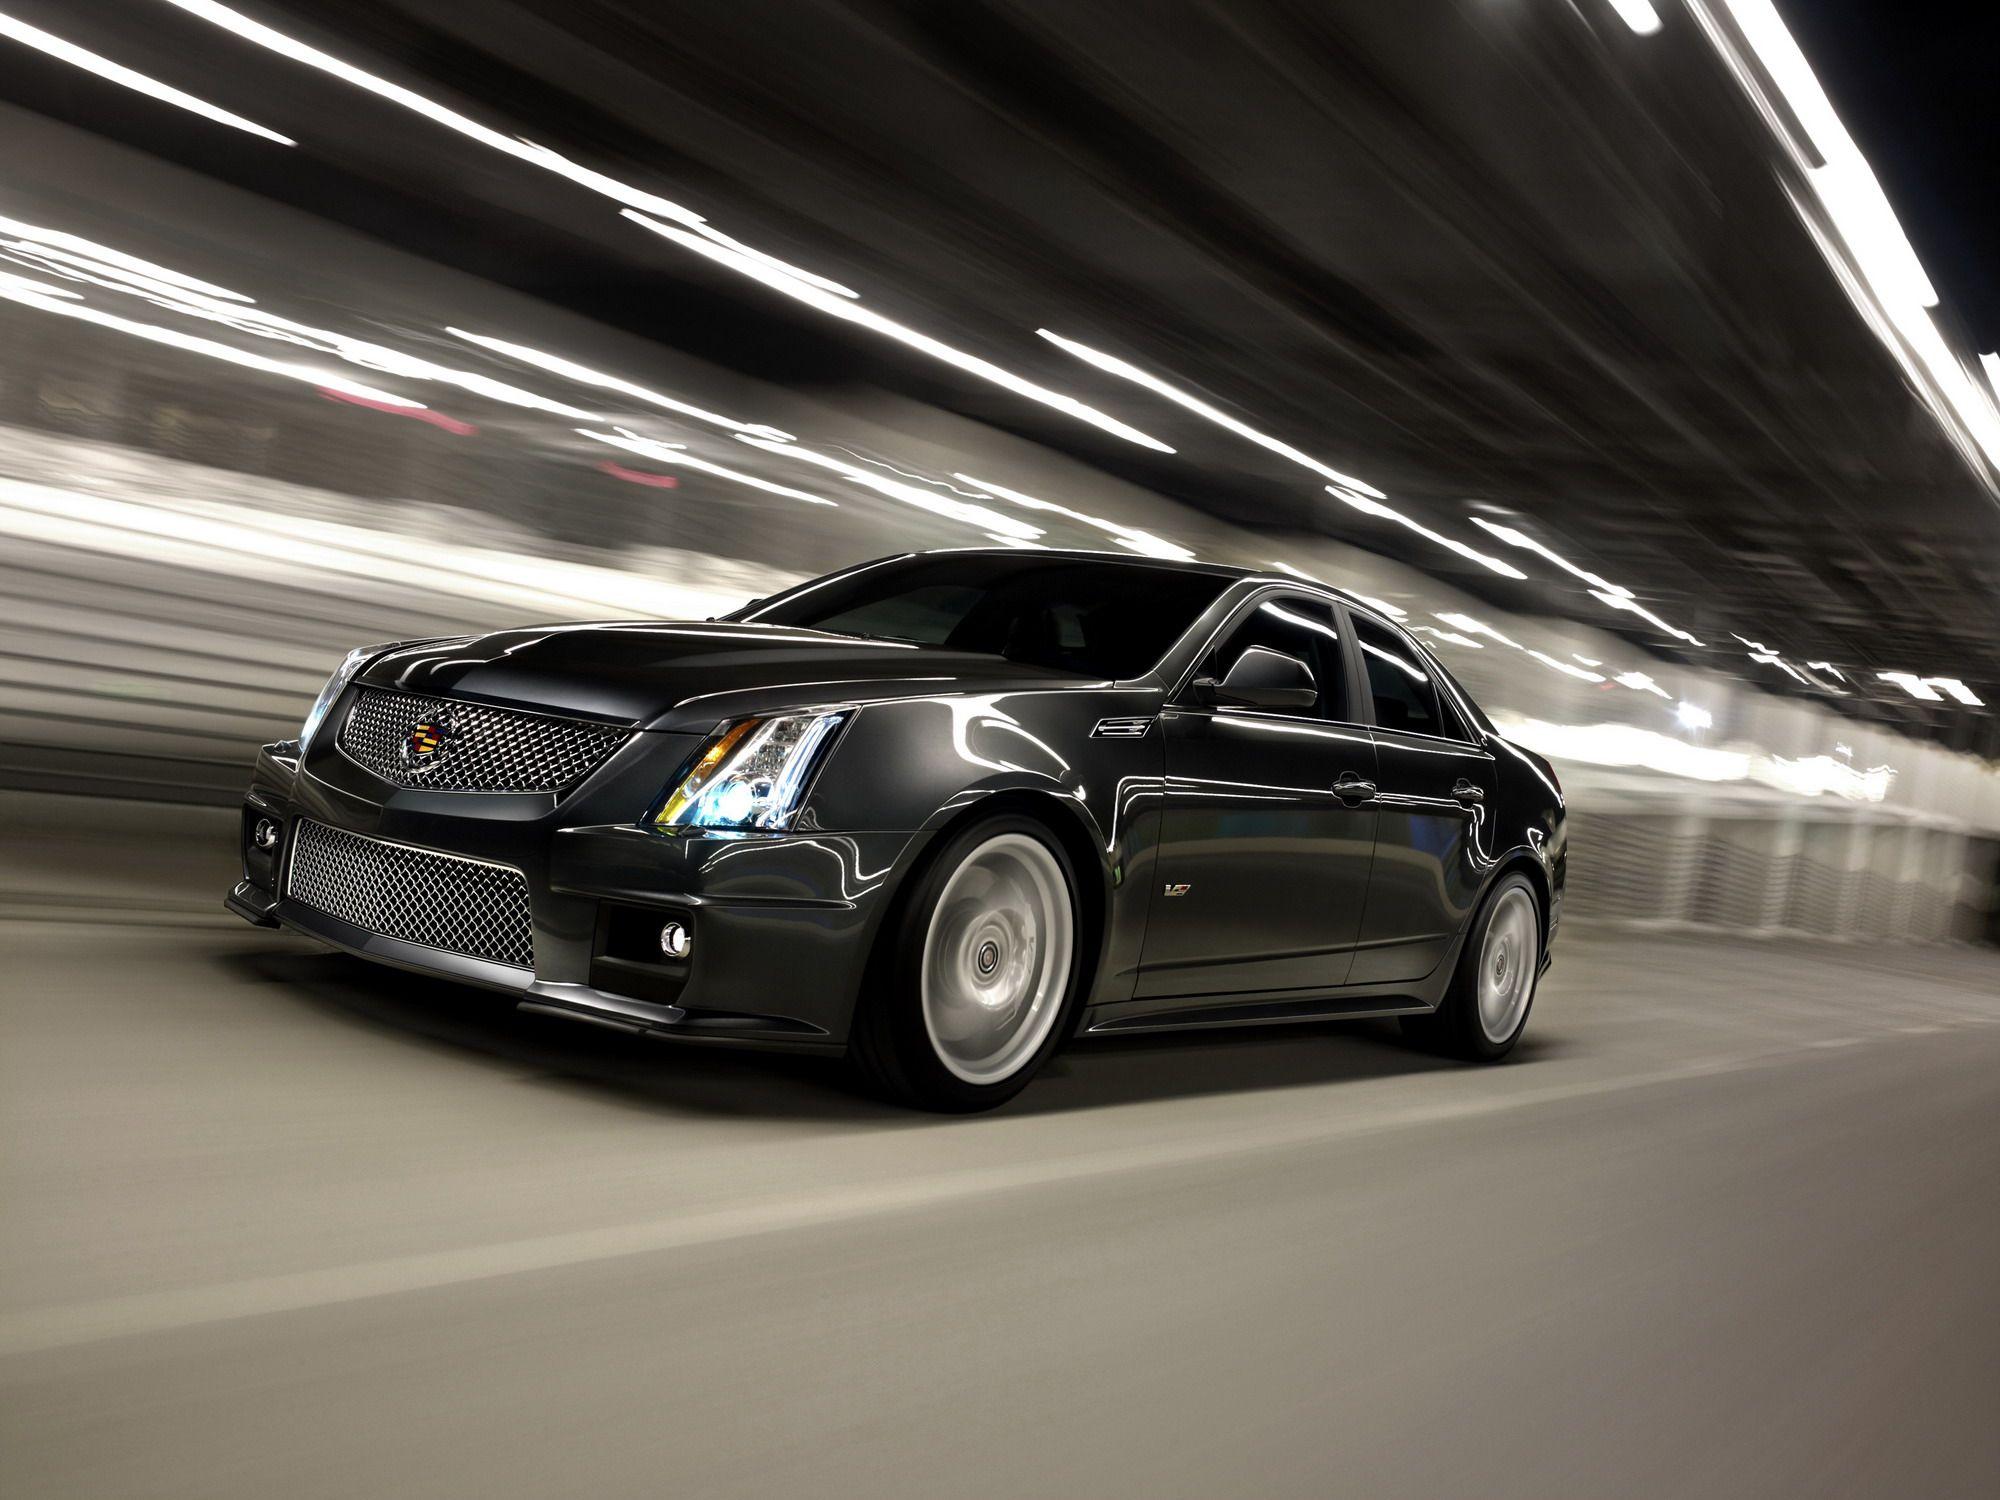 Cadillac Cts Wallpapers Top Free Cadillac Cts Backgrounds Wallpaperaccess